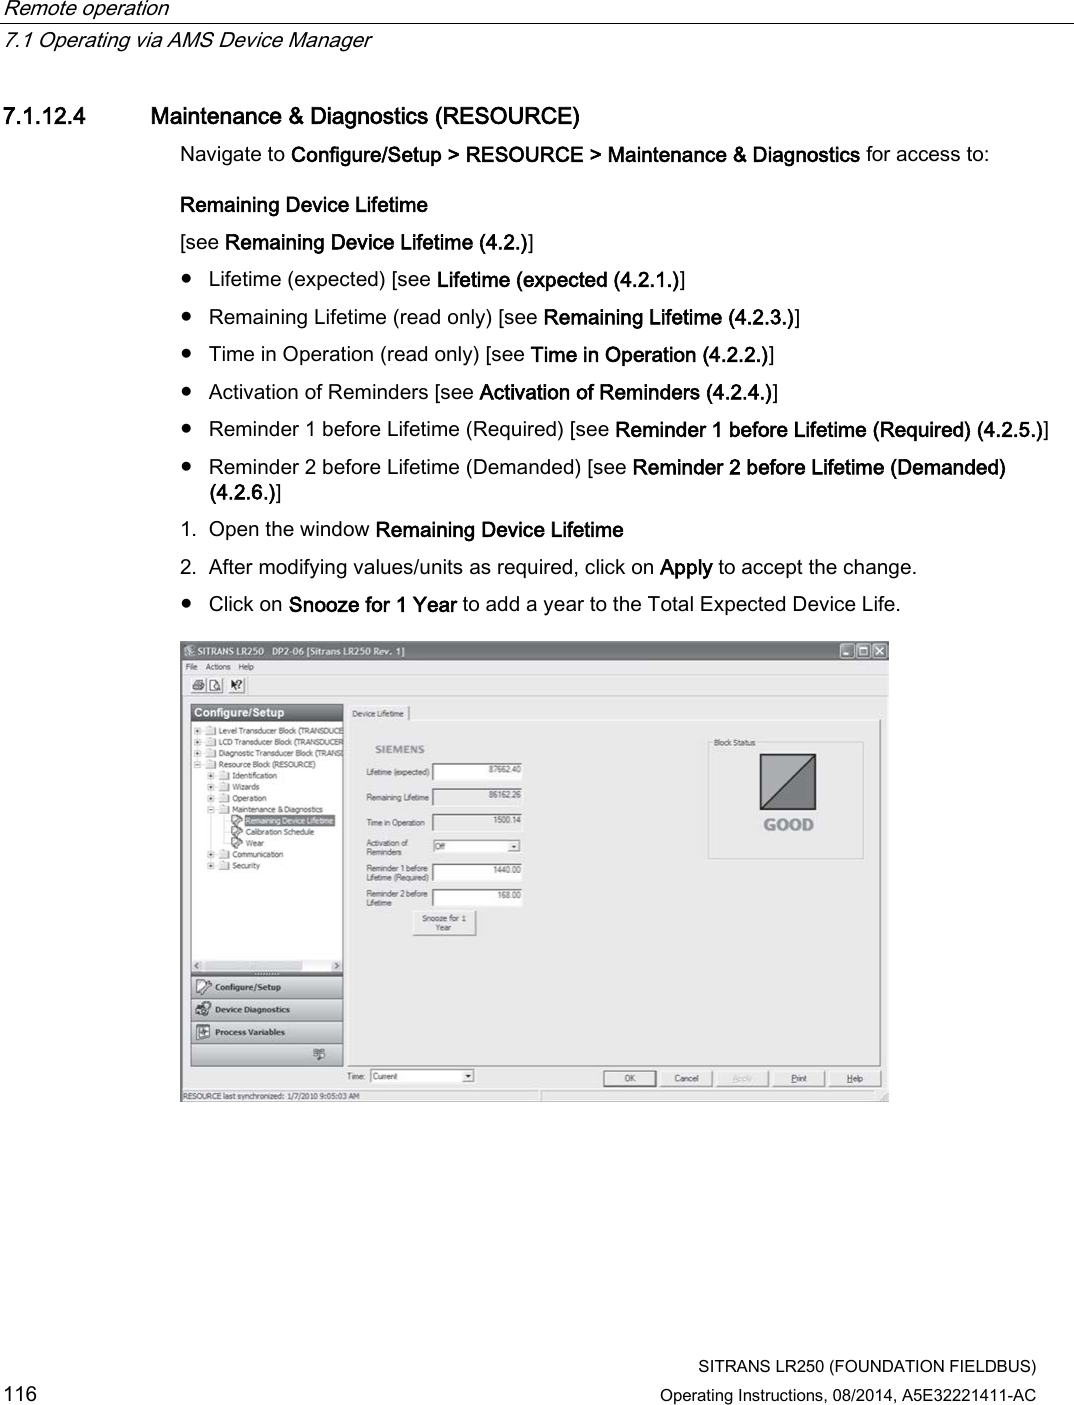 Remote operation   7.1 Operating via AMS Device Manager  SITRANS LR250 (FOUNDATION FIELDBUS) 116 Operating Instructions, 08/2014, A5E32221411-AC 7.1.12.4 Maintenance &amp; Diagnostics (RESOURCE) Navigate to Configure/Setup &gt; RESOURCE &gt; Maintenance &amp; Diagnostics for access to: Remaining Device Lifetime  [see Remaining Device Lifetime (4.2.)] ● Lifetime (expected) [see Lifetime (expected (4.2.1.)] ● Remaining Lifetime (read only) [see Remaining Lifetime (4.2.3.)] ● Time in Operation (read only) [see Time in Operation (4.2.2.)] ● Activation of Reminders [see Activation of Reminders (4.2.4.)] ● Reminder 1 before Lifetime (Required) [see Reminder 1 before Lifetime (Required) (4.2.5.)] ● Reminder 2 before Lifetime (Demanded) [see Reminder 2 before Lifetime (Demanded) (4.2.6.)] 1. Open the window Remaining Device Lifetime 2. After modifying values/units as required, click on Apply to accept the change. ● Click on Snooze for 1 Year to add a year to the Total Expected Device Life.  